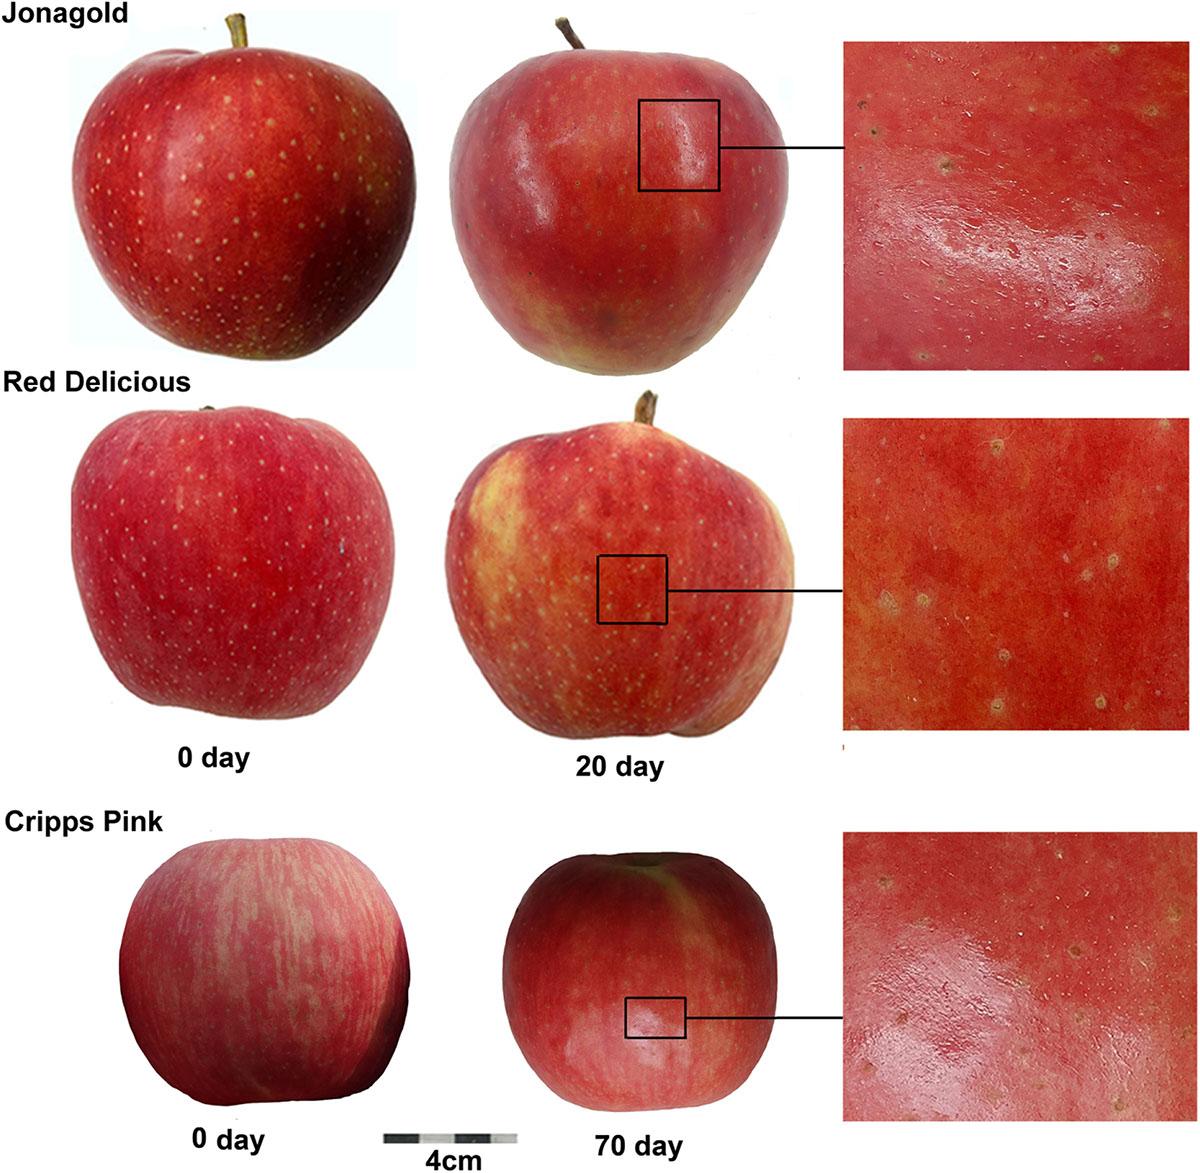 Three apple cultivars: Jonagold (top), Red Delicious (middle), Cripps Pink (bottom). Apples on the left are without grease on day 0 of postharvest storage. Apples on the right is after 20 days of storage at 68°F with an increased rate of greasiness for only Cripps Pink and Jonagold cultivars.